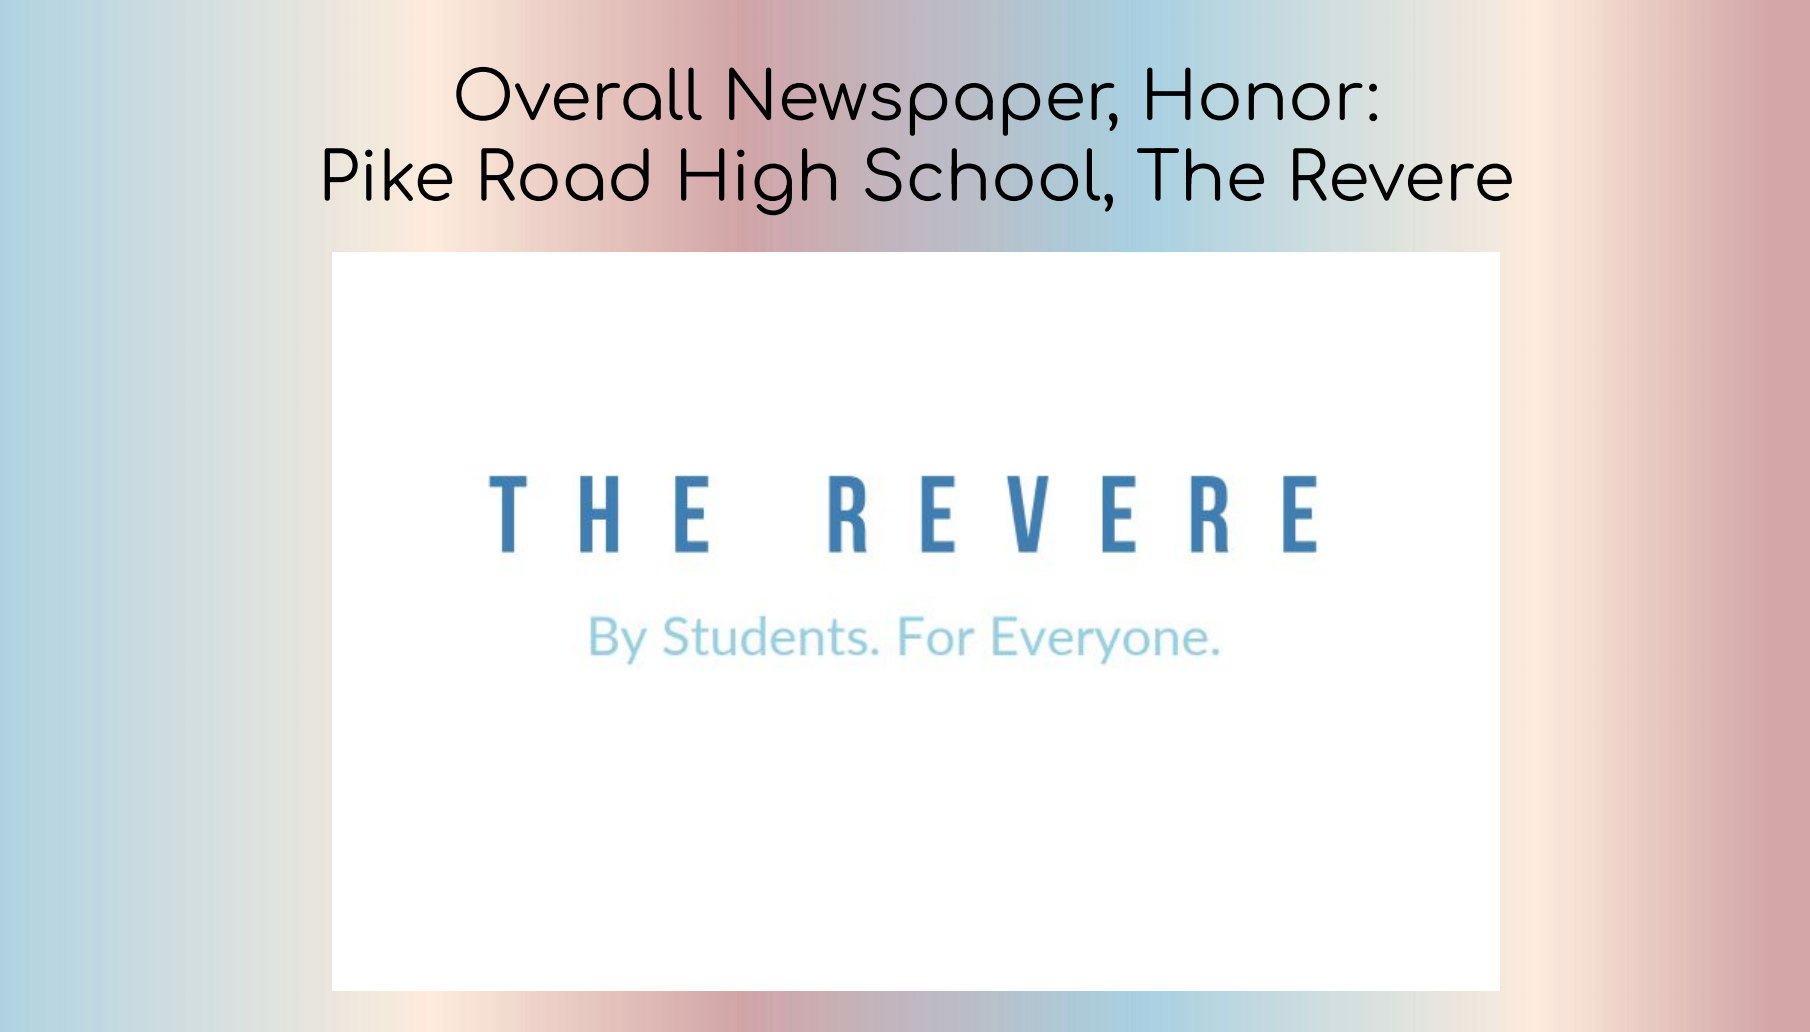 Honor rating from the Alabama Scholastic Press Association 